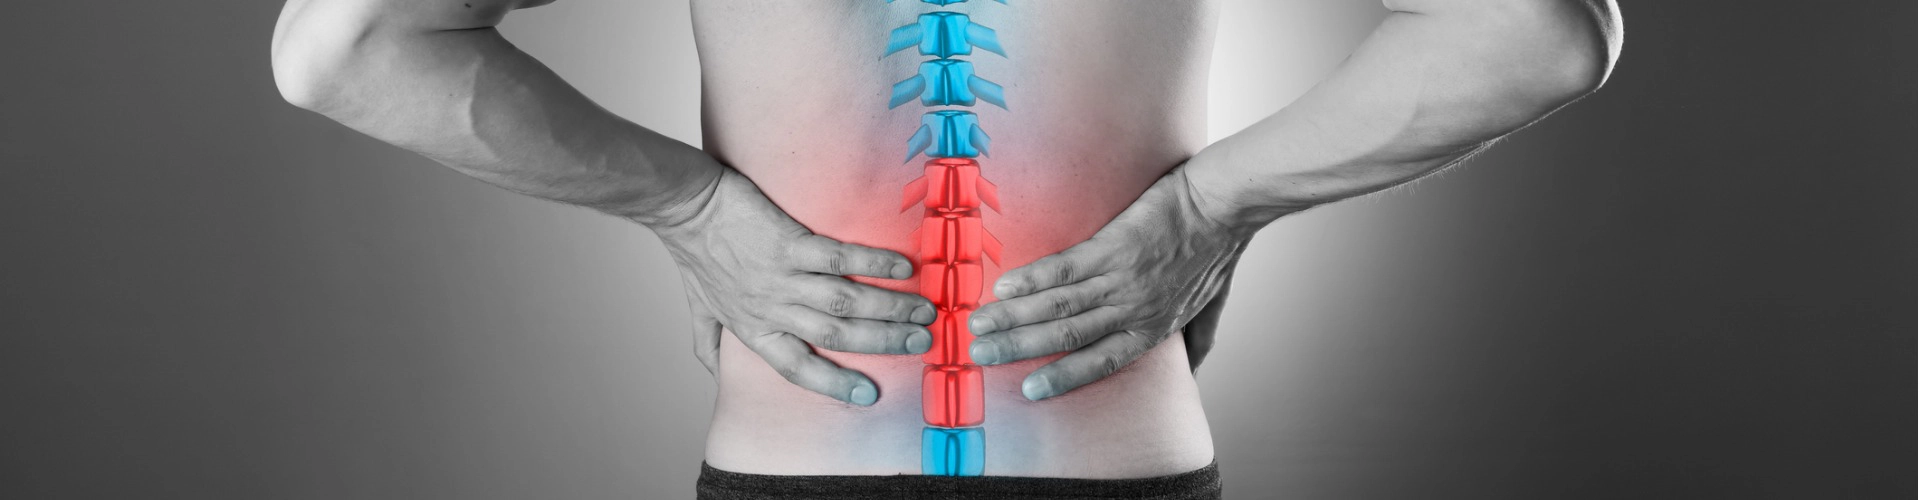 New and Improved Spinal Cord Stimulators Offer Drug-Free Relief for Chronic Back  Pain: Summit Pain Alliance: Pain Management Specialists